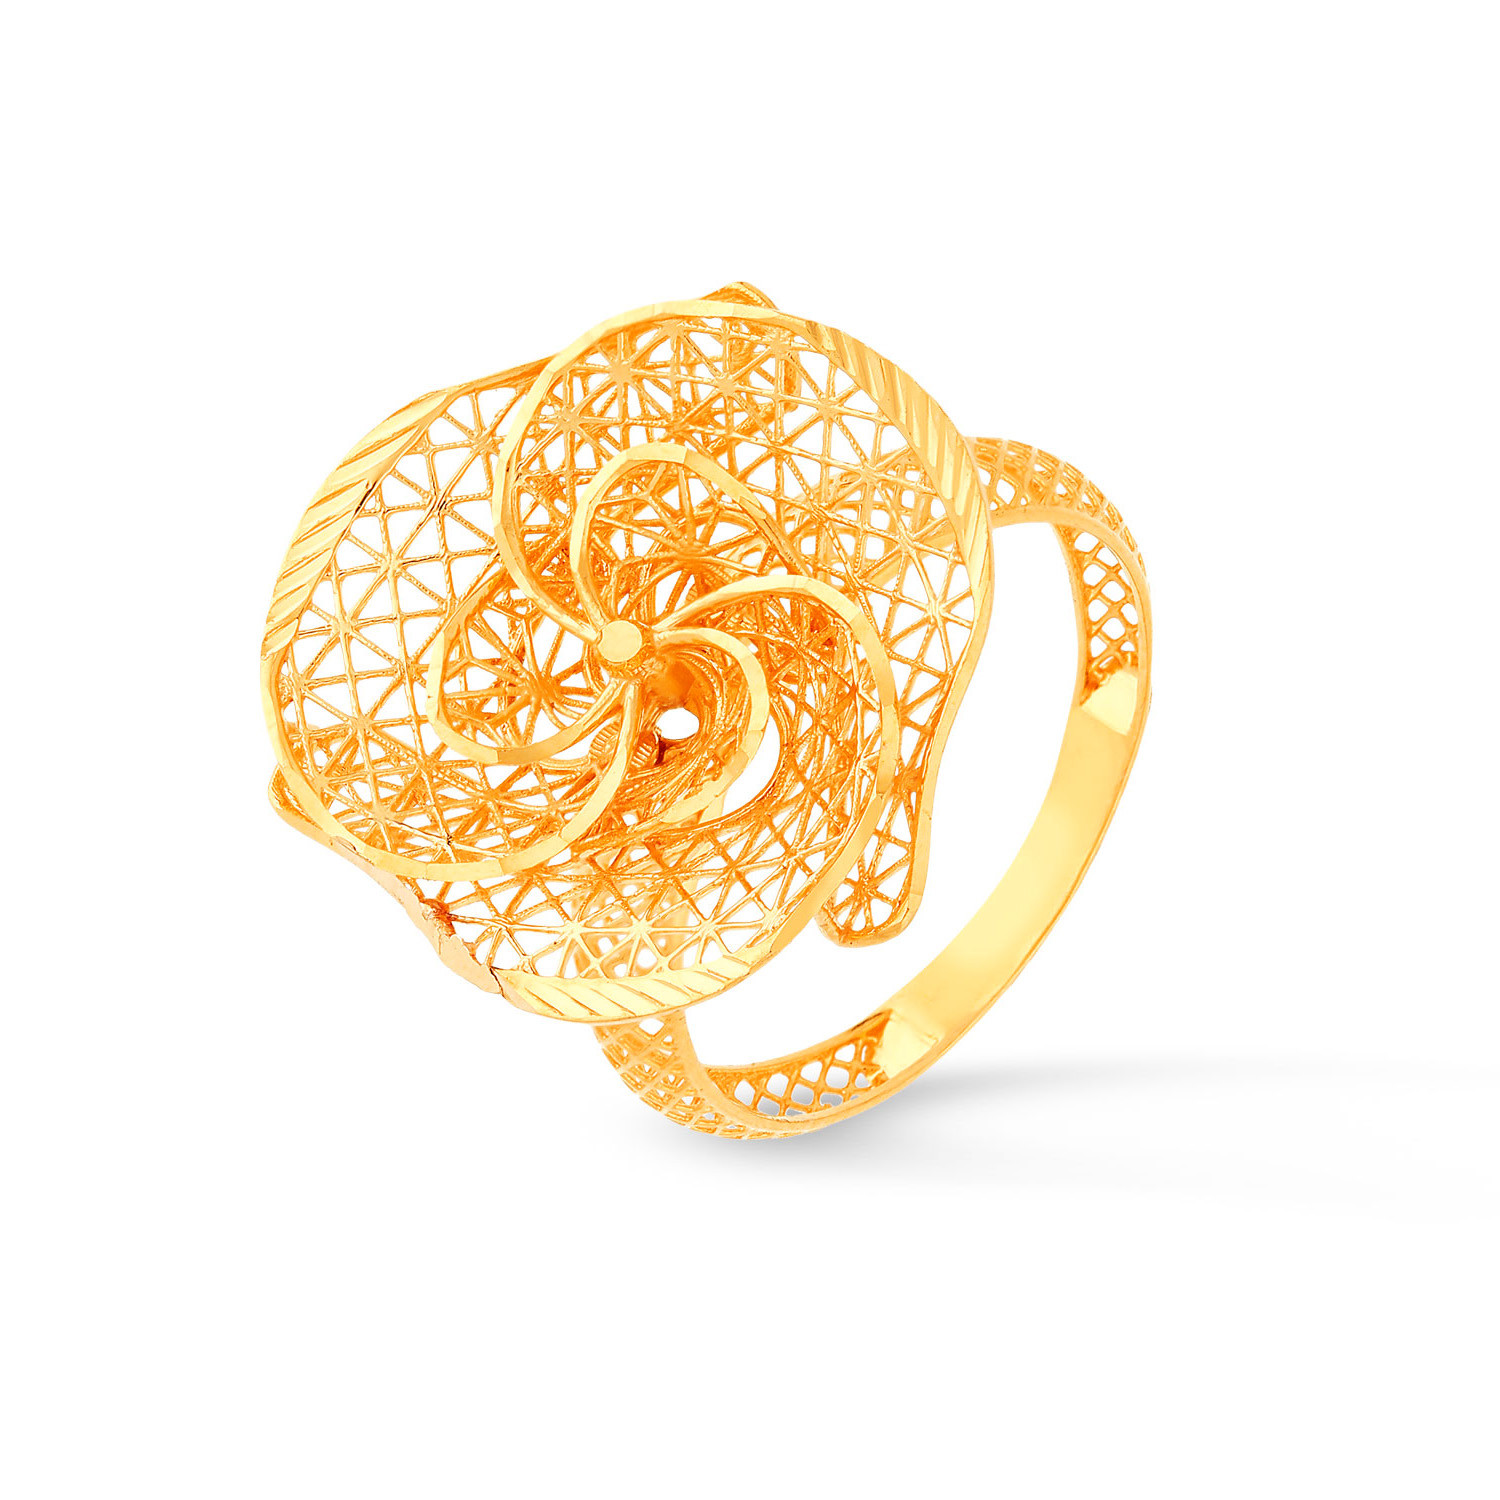 SKM Gold Finger Ring in Bharuch - Dealers, Manufacturers & Suppliers -  Justdial